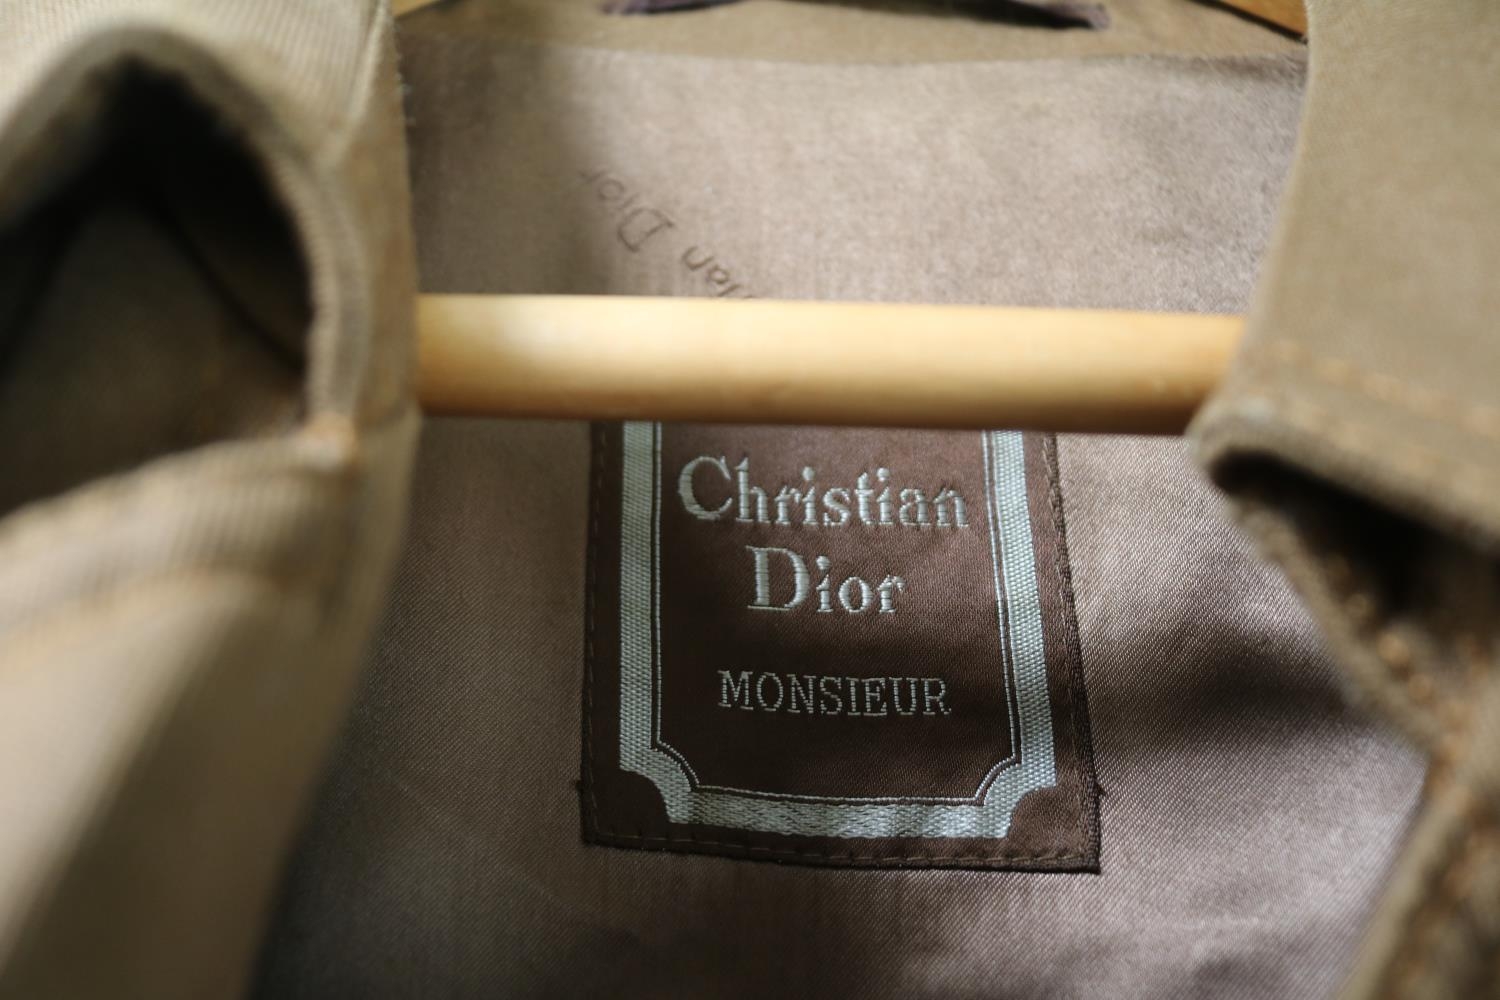 Christian Dior Monsieur Brown Trench Coat Mac retailed by Stoffels Small to medium size - Image 4 of 4